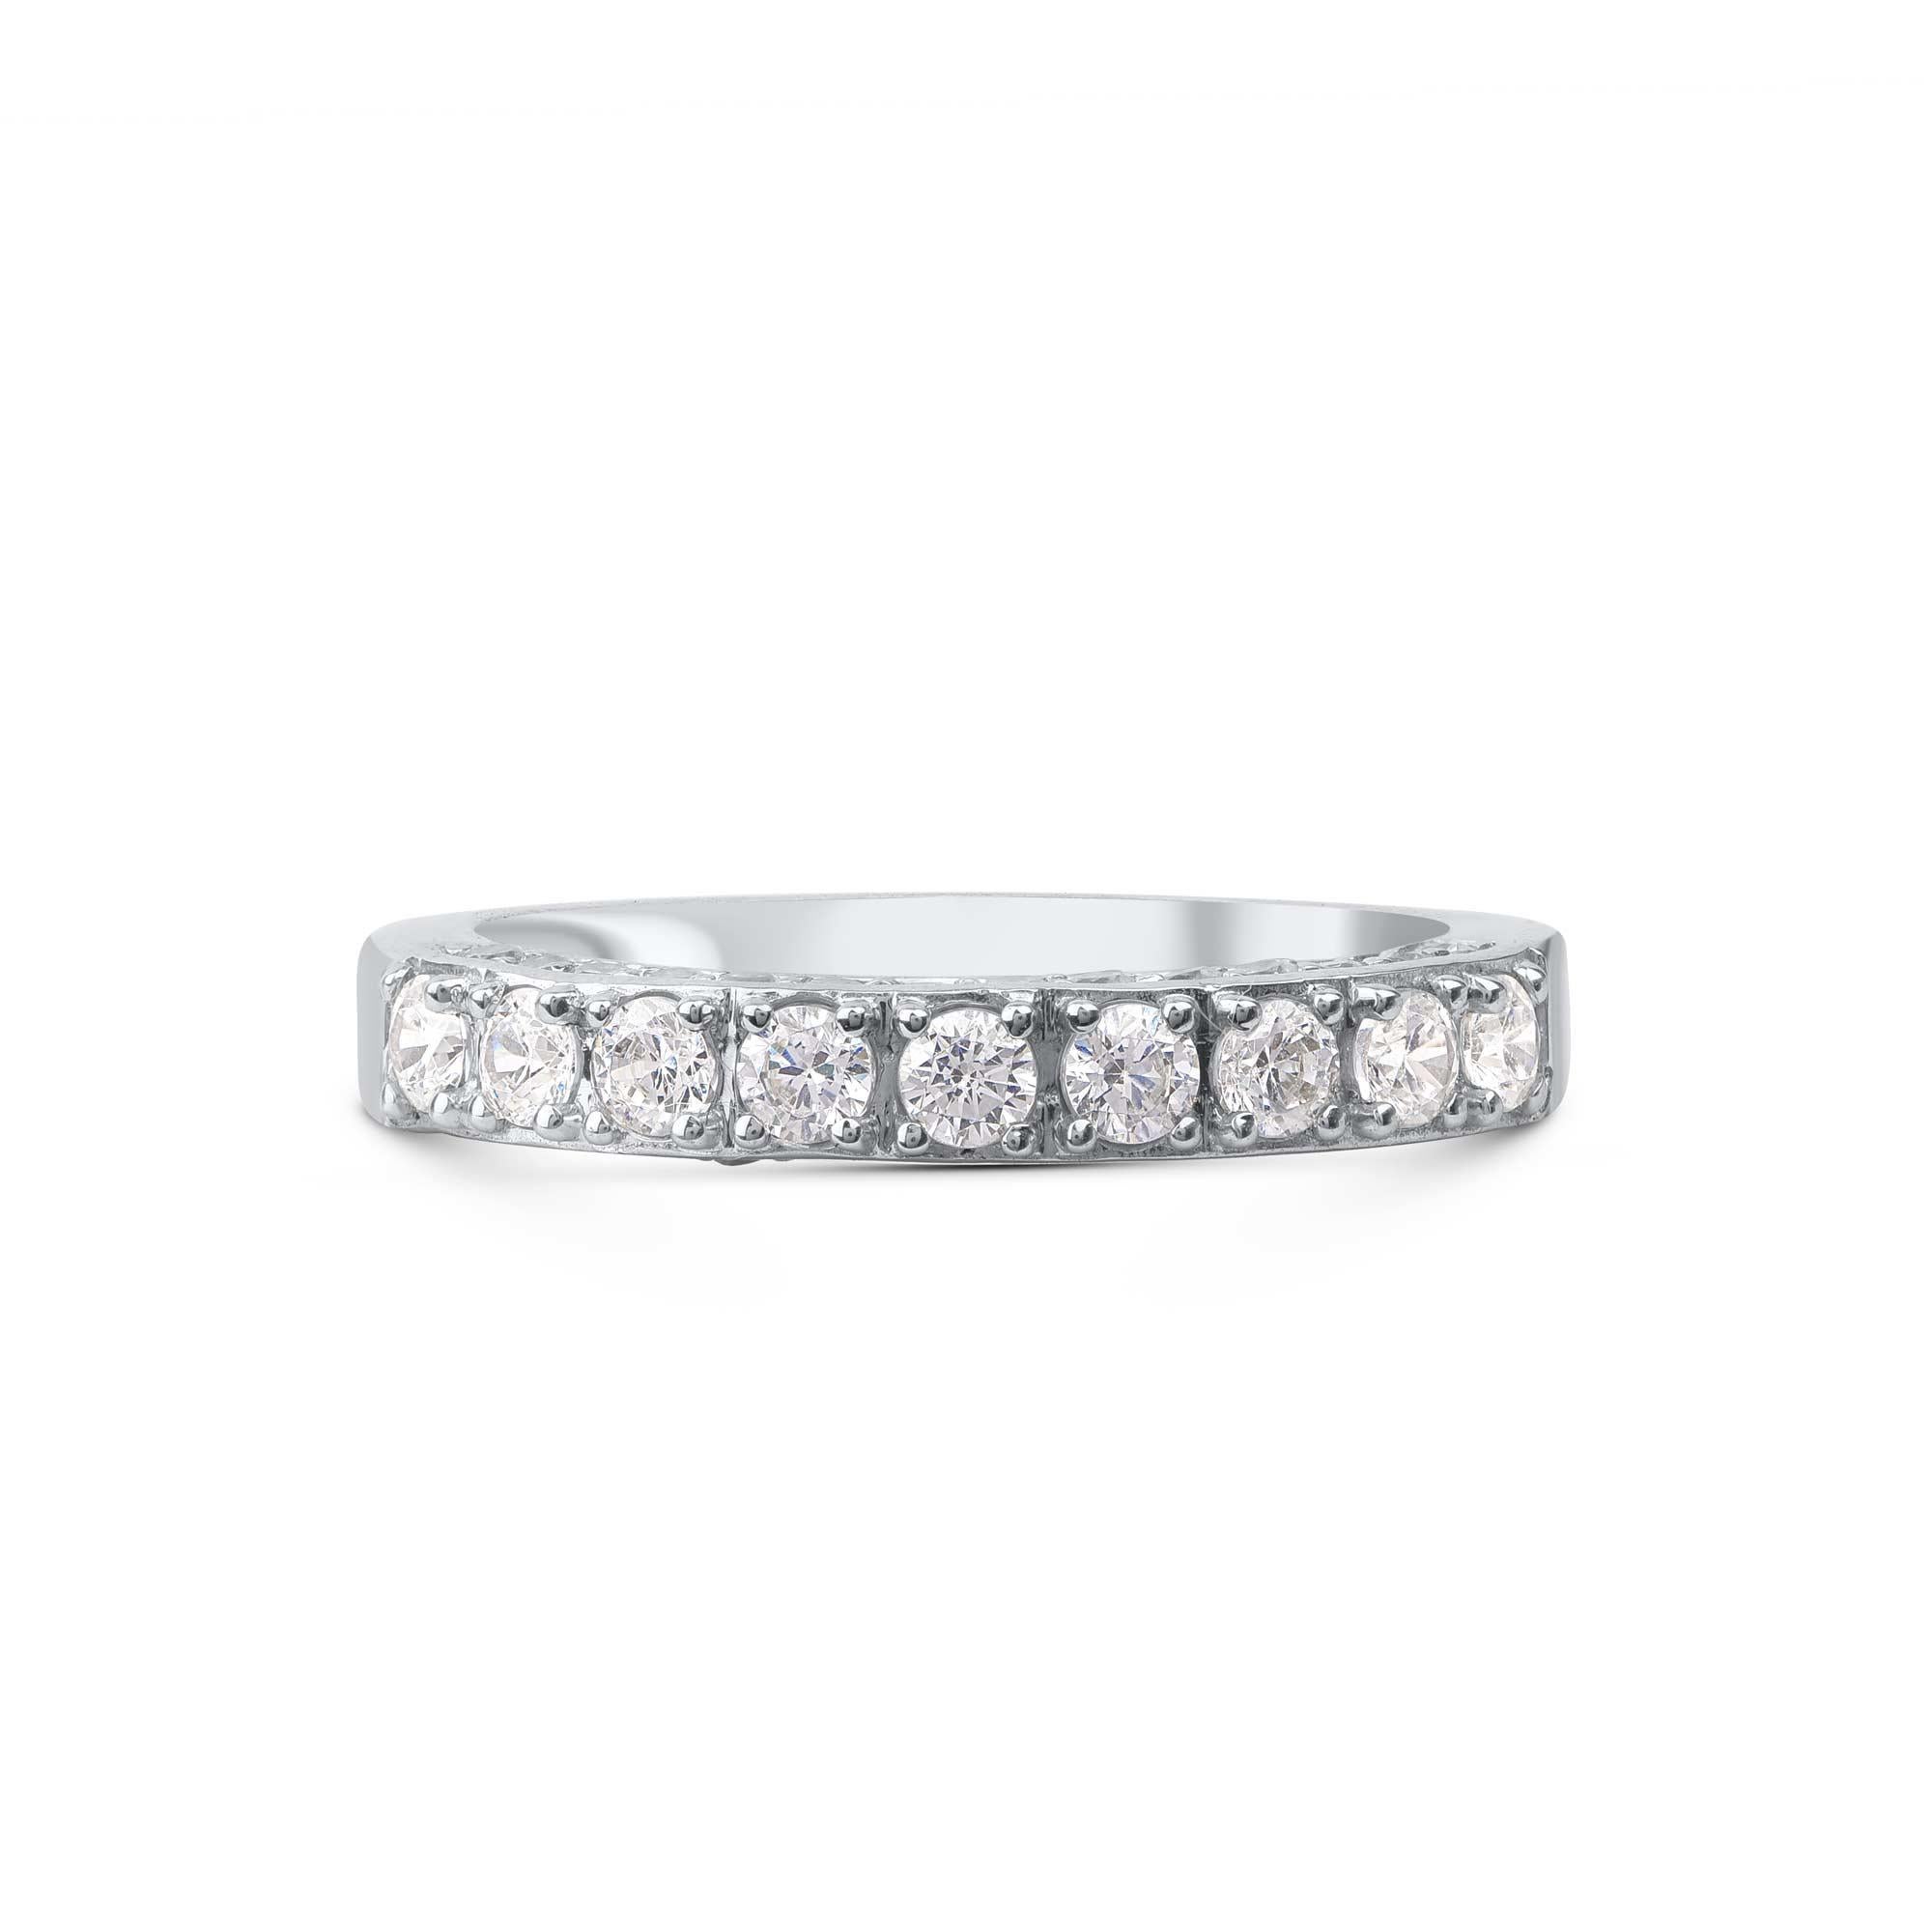 Honor your special day with this exceptional diamond band ring. This band ring features a sparkling 38 brilliant cut round diamonds beautifully set in prong & pave setting. The total diamond weight is 1.0 Carat. The diamonds are graded as H-I color